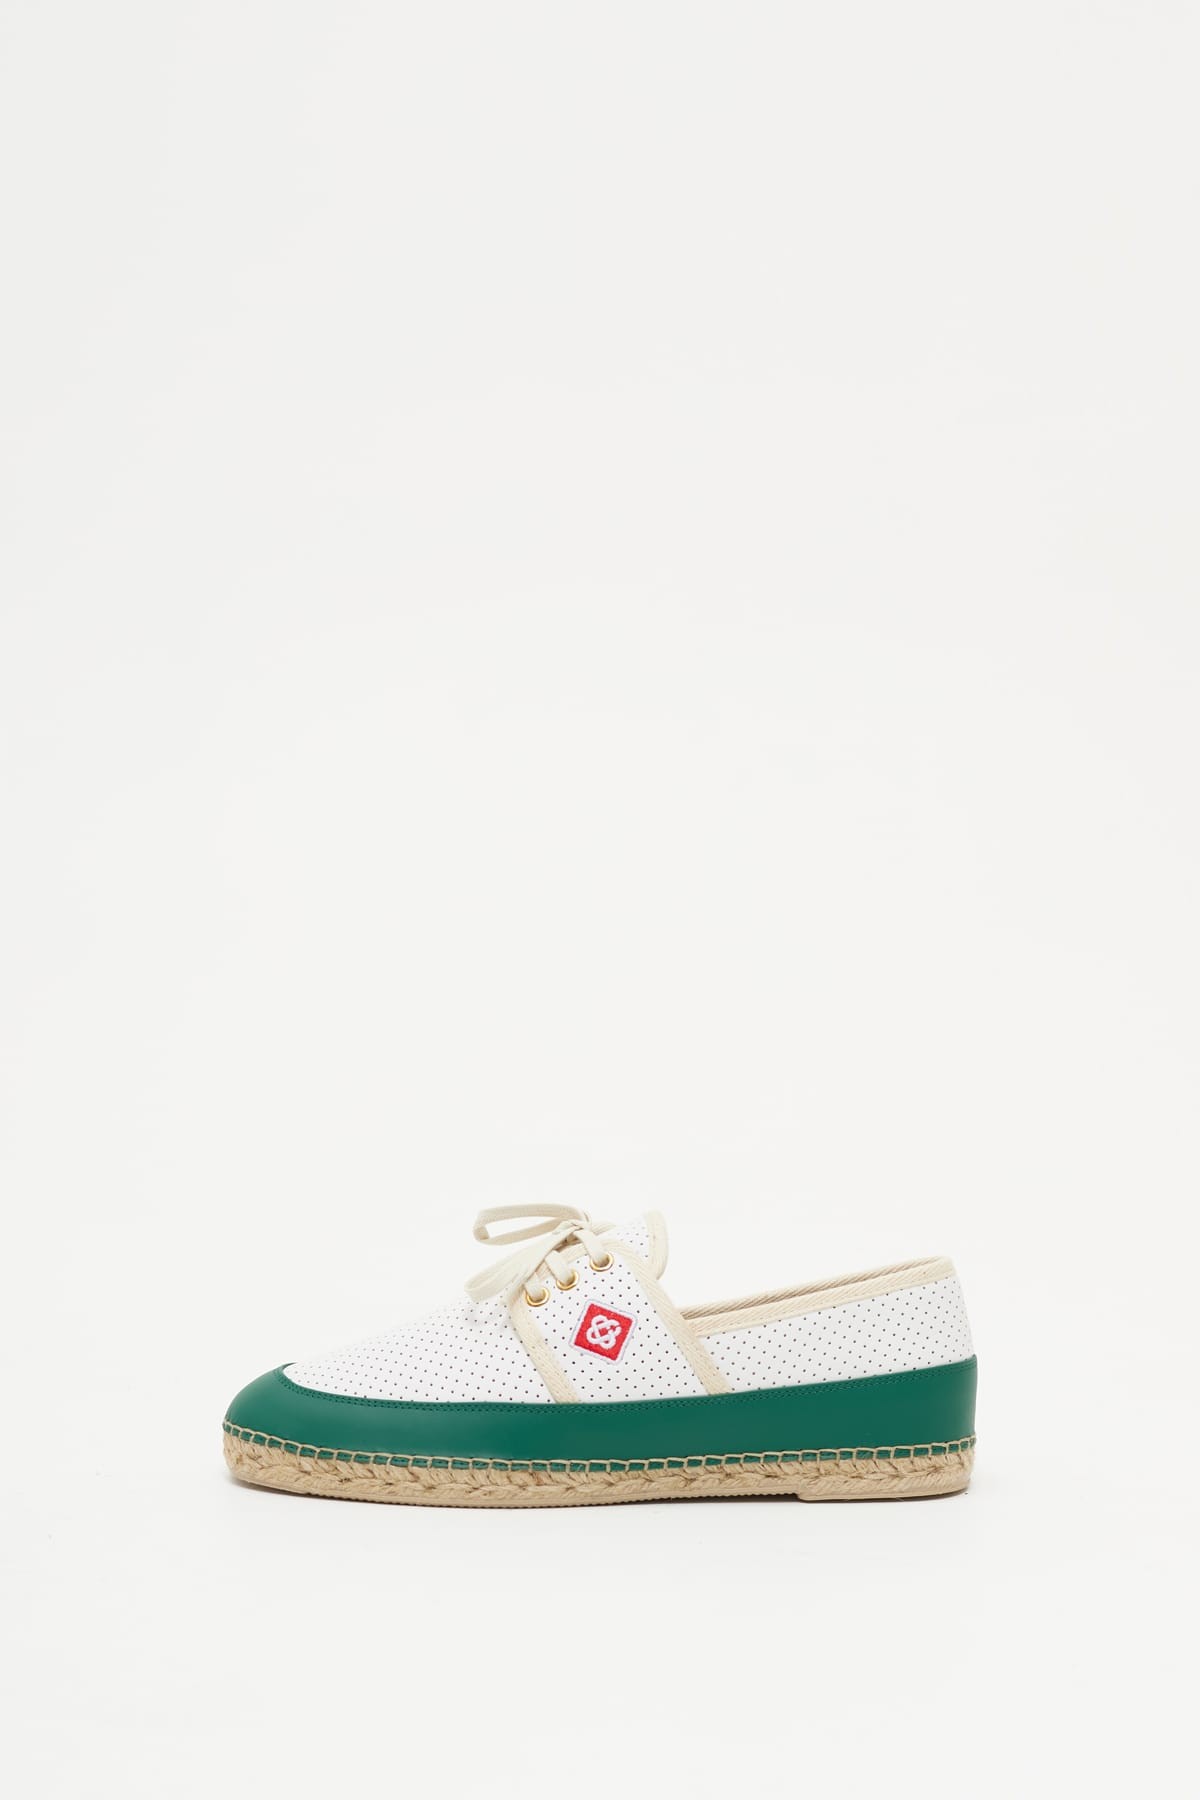 CASABLANCA WHITE GREEN PERFORATED LEATHER ESPADRILLE SHOES IAMNUE